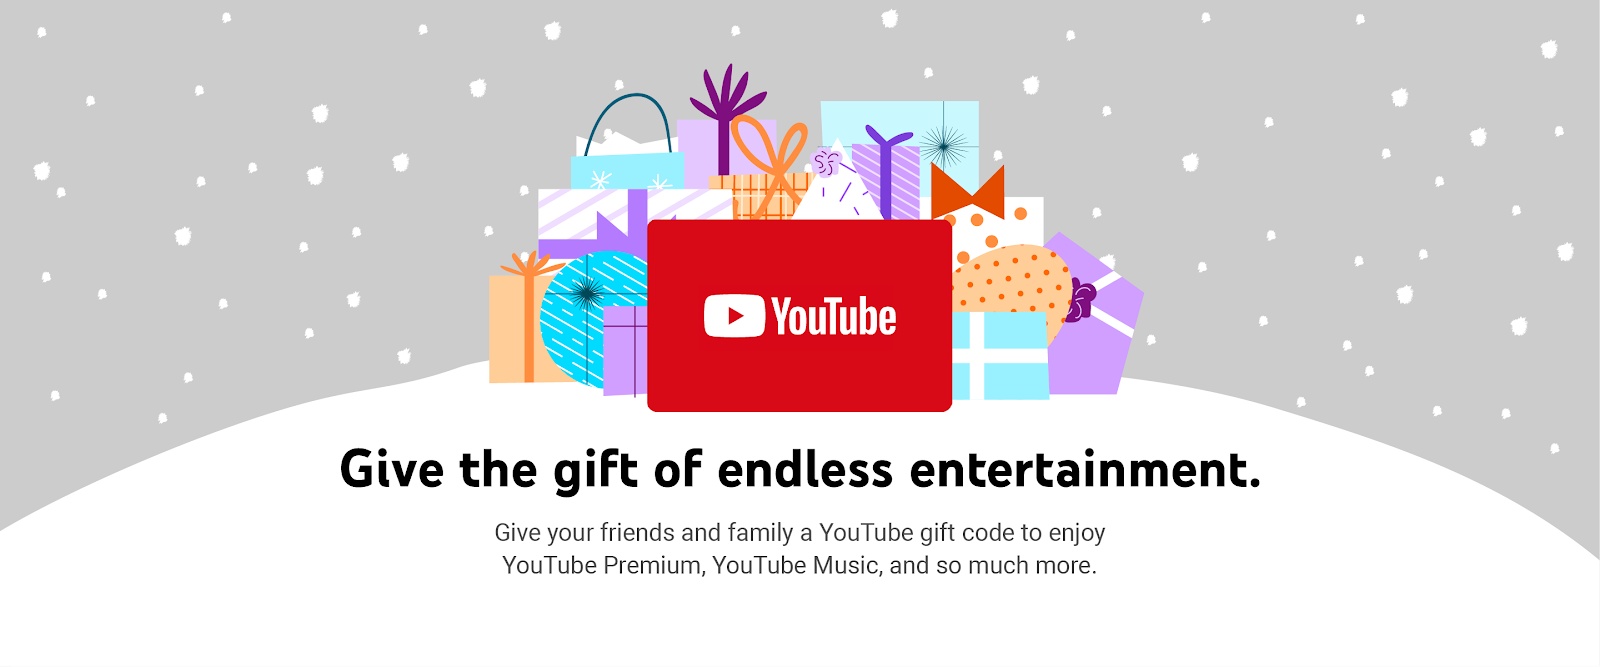 Youtube Gift Codes Are Now Available On Amazon